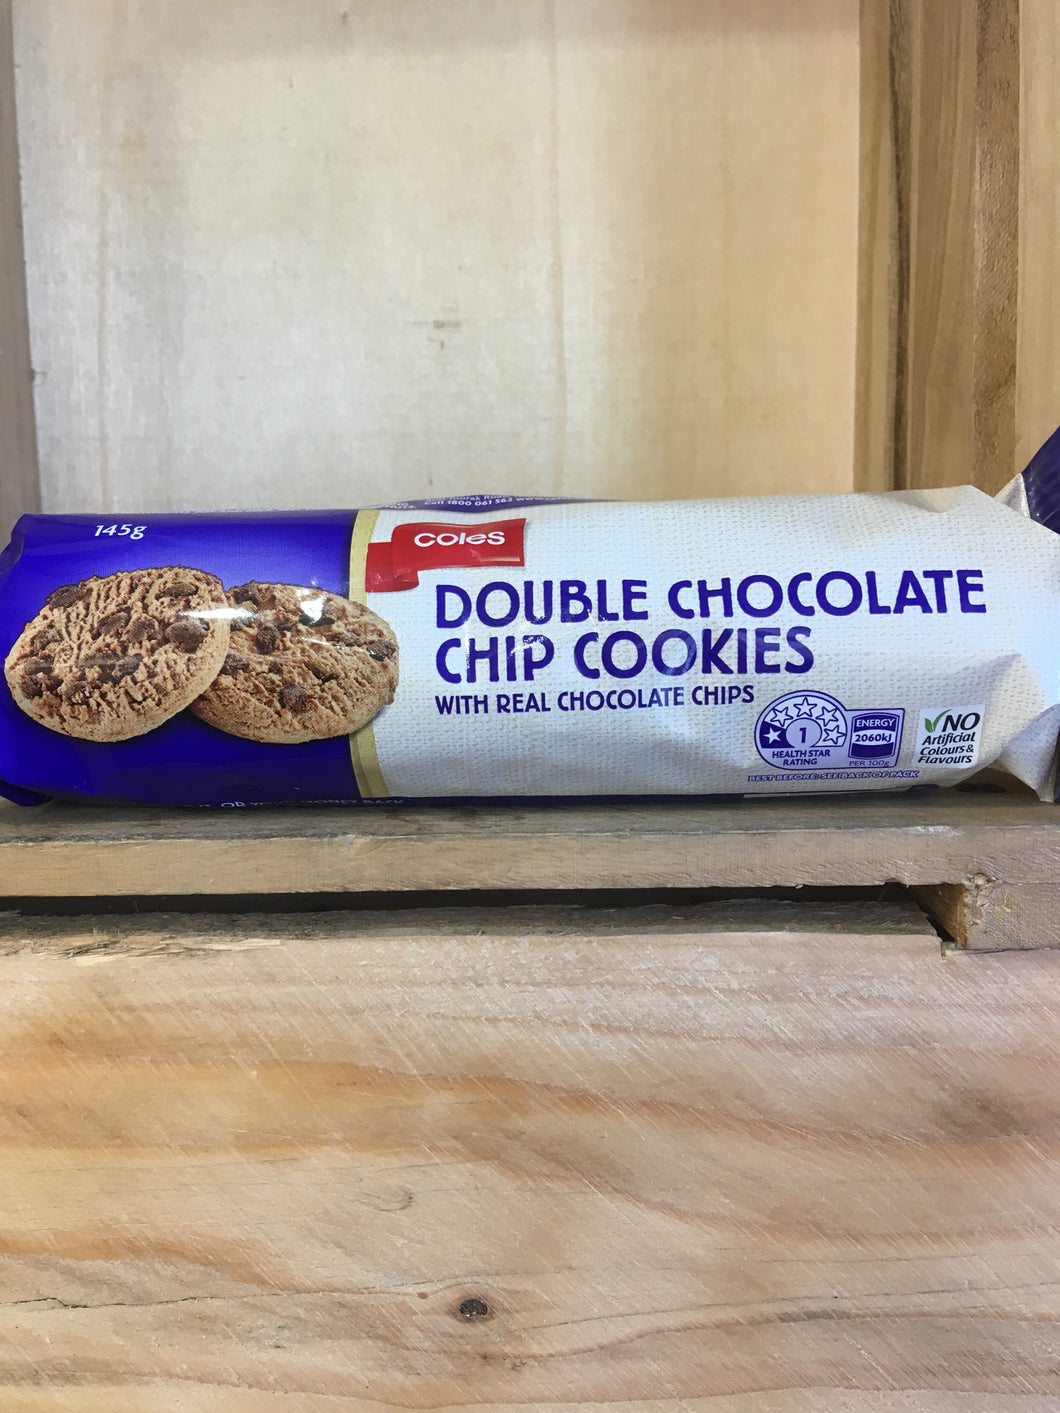 Coles Double Chocolate Chip Cookies with Real Chocolate Chips 145g